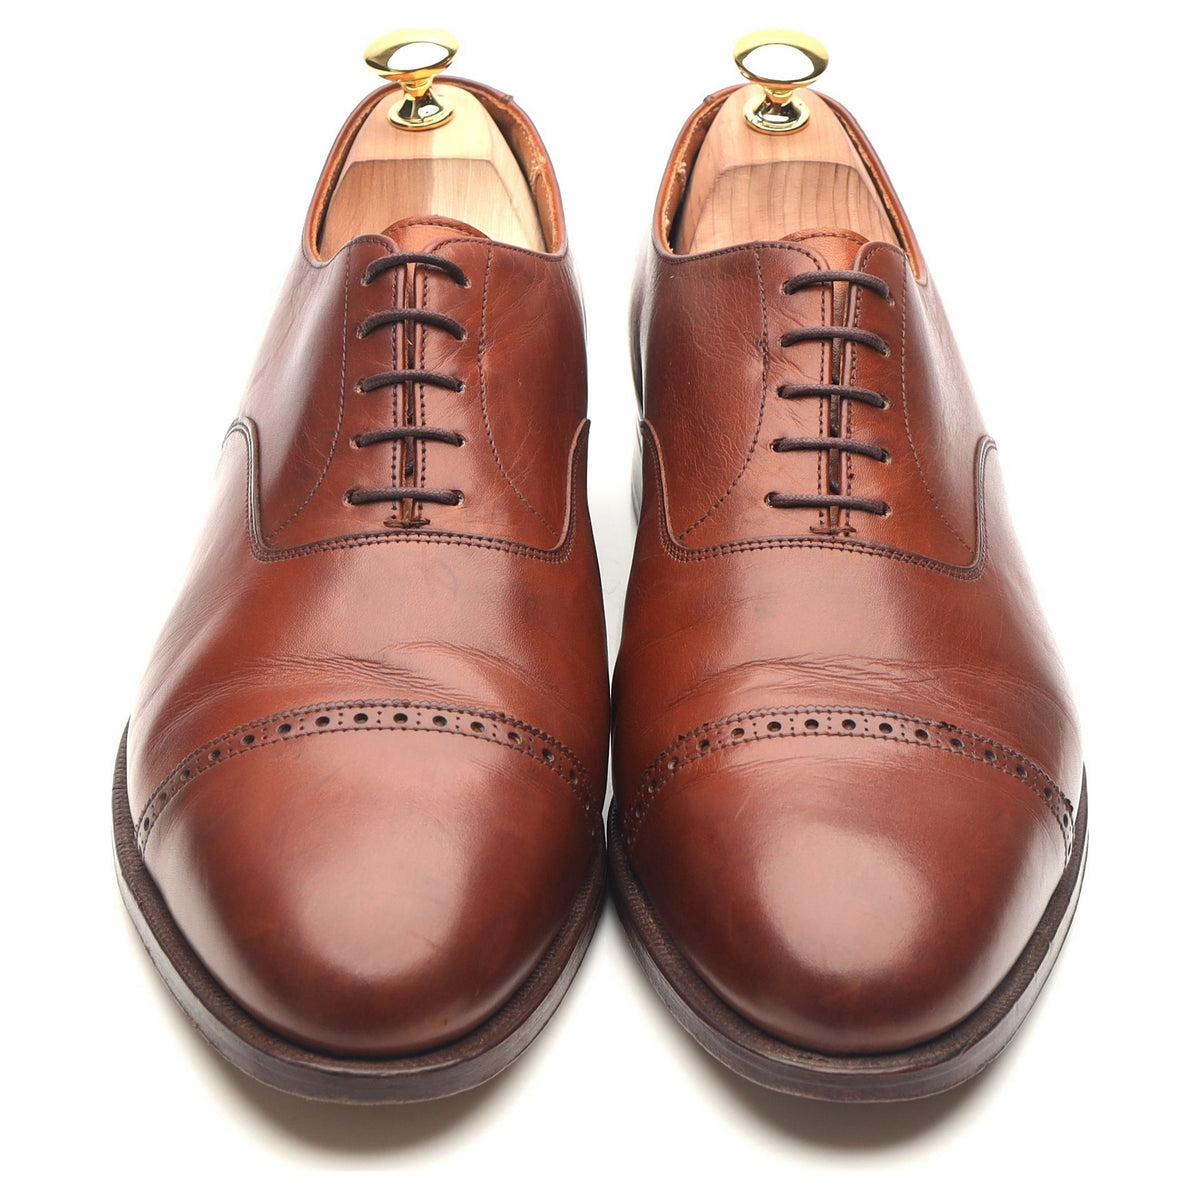 Tan Brown Leather Oxford UK 10.5 E US 11.5 D